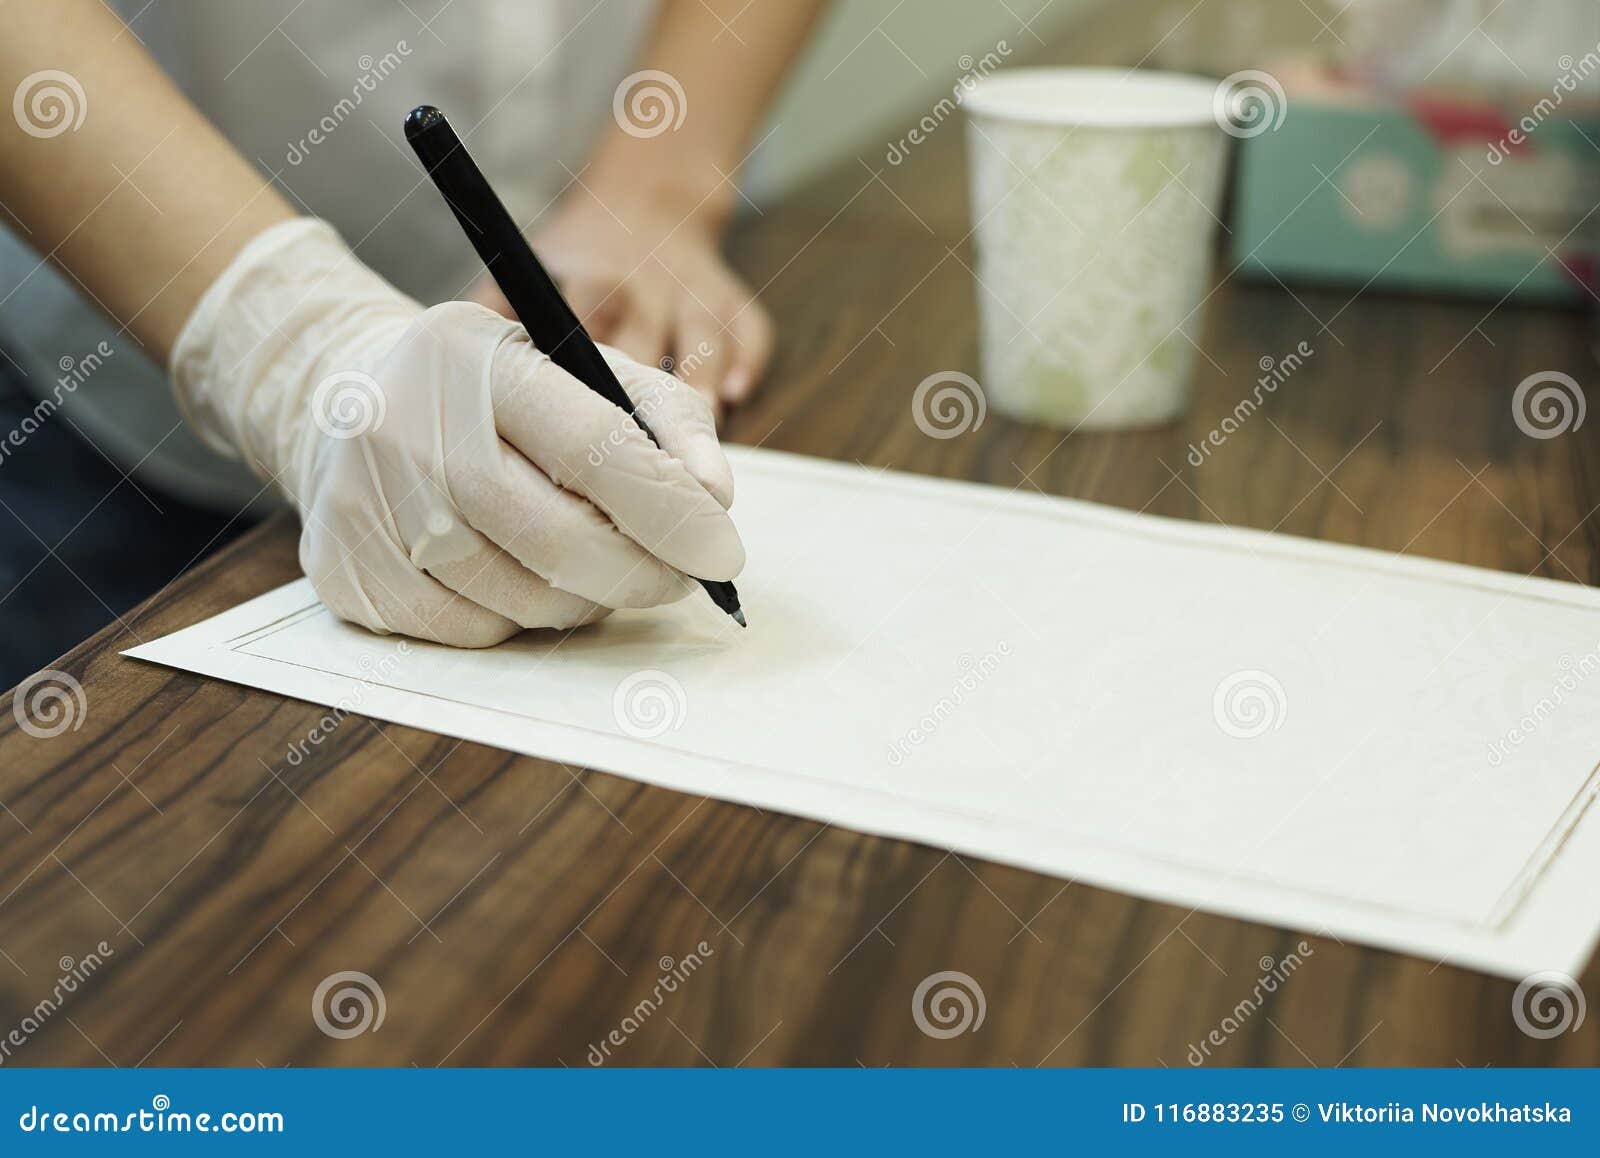 The Girl`s Hand Holds a Pen on Sheet of Paper. Stock Image - Image of ...